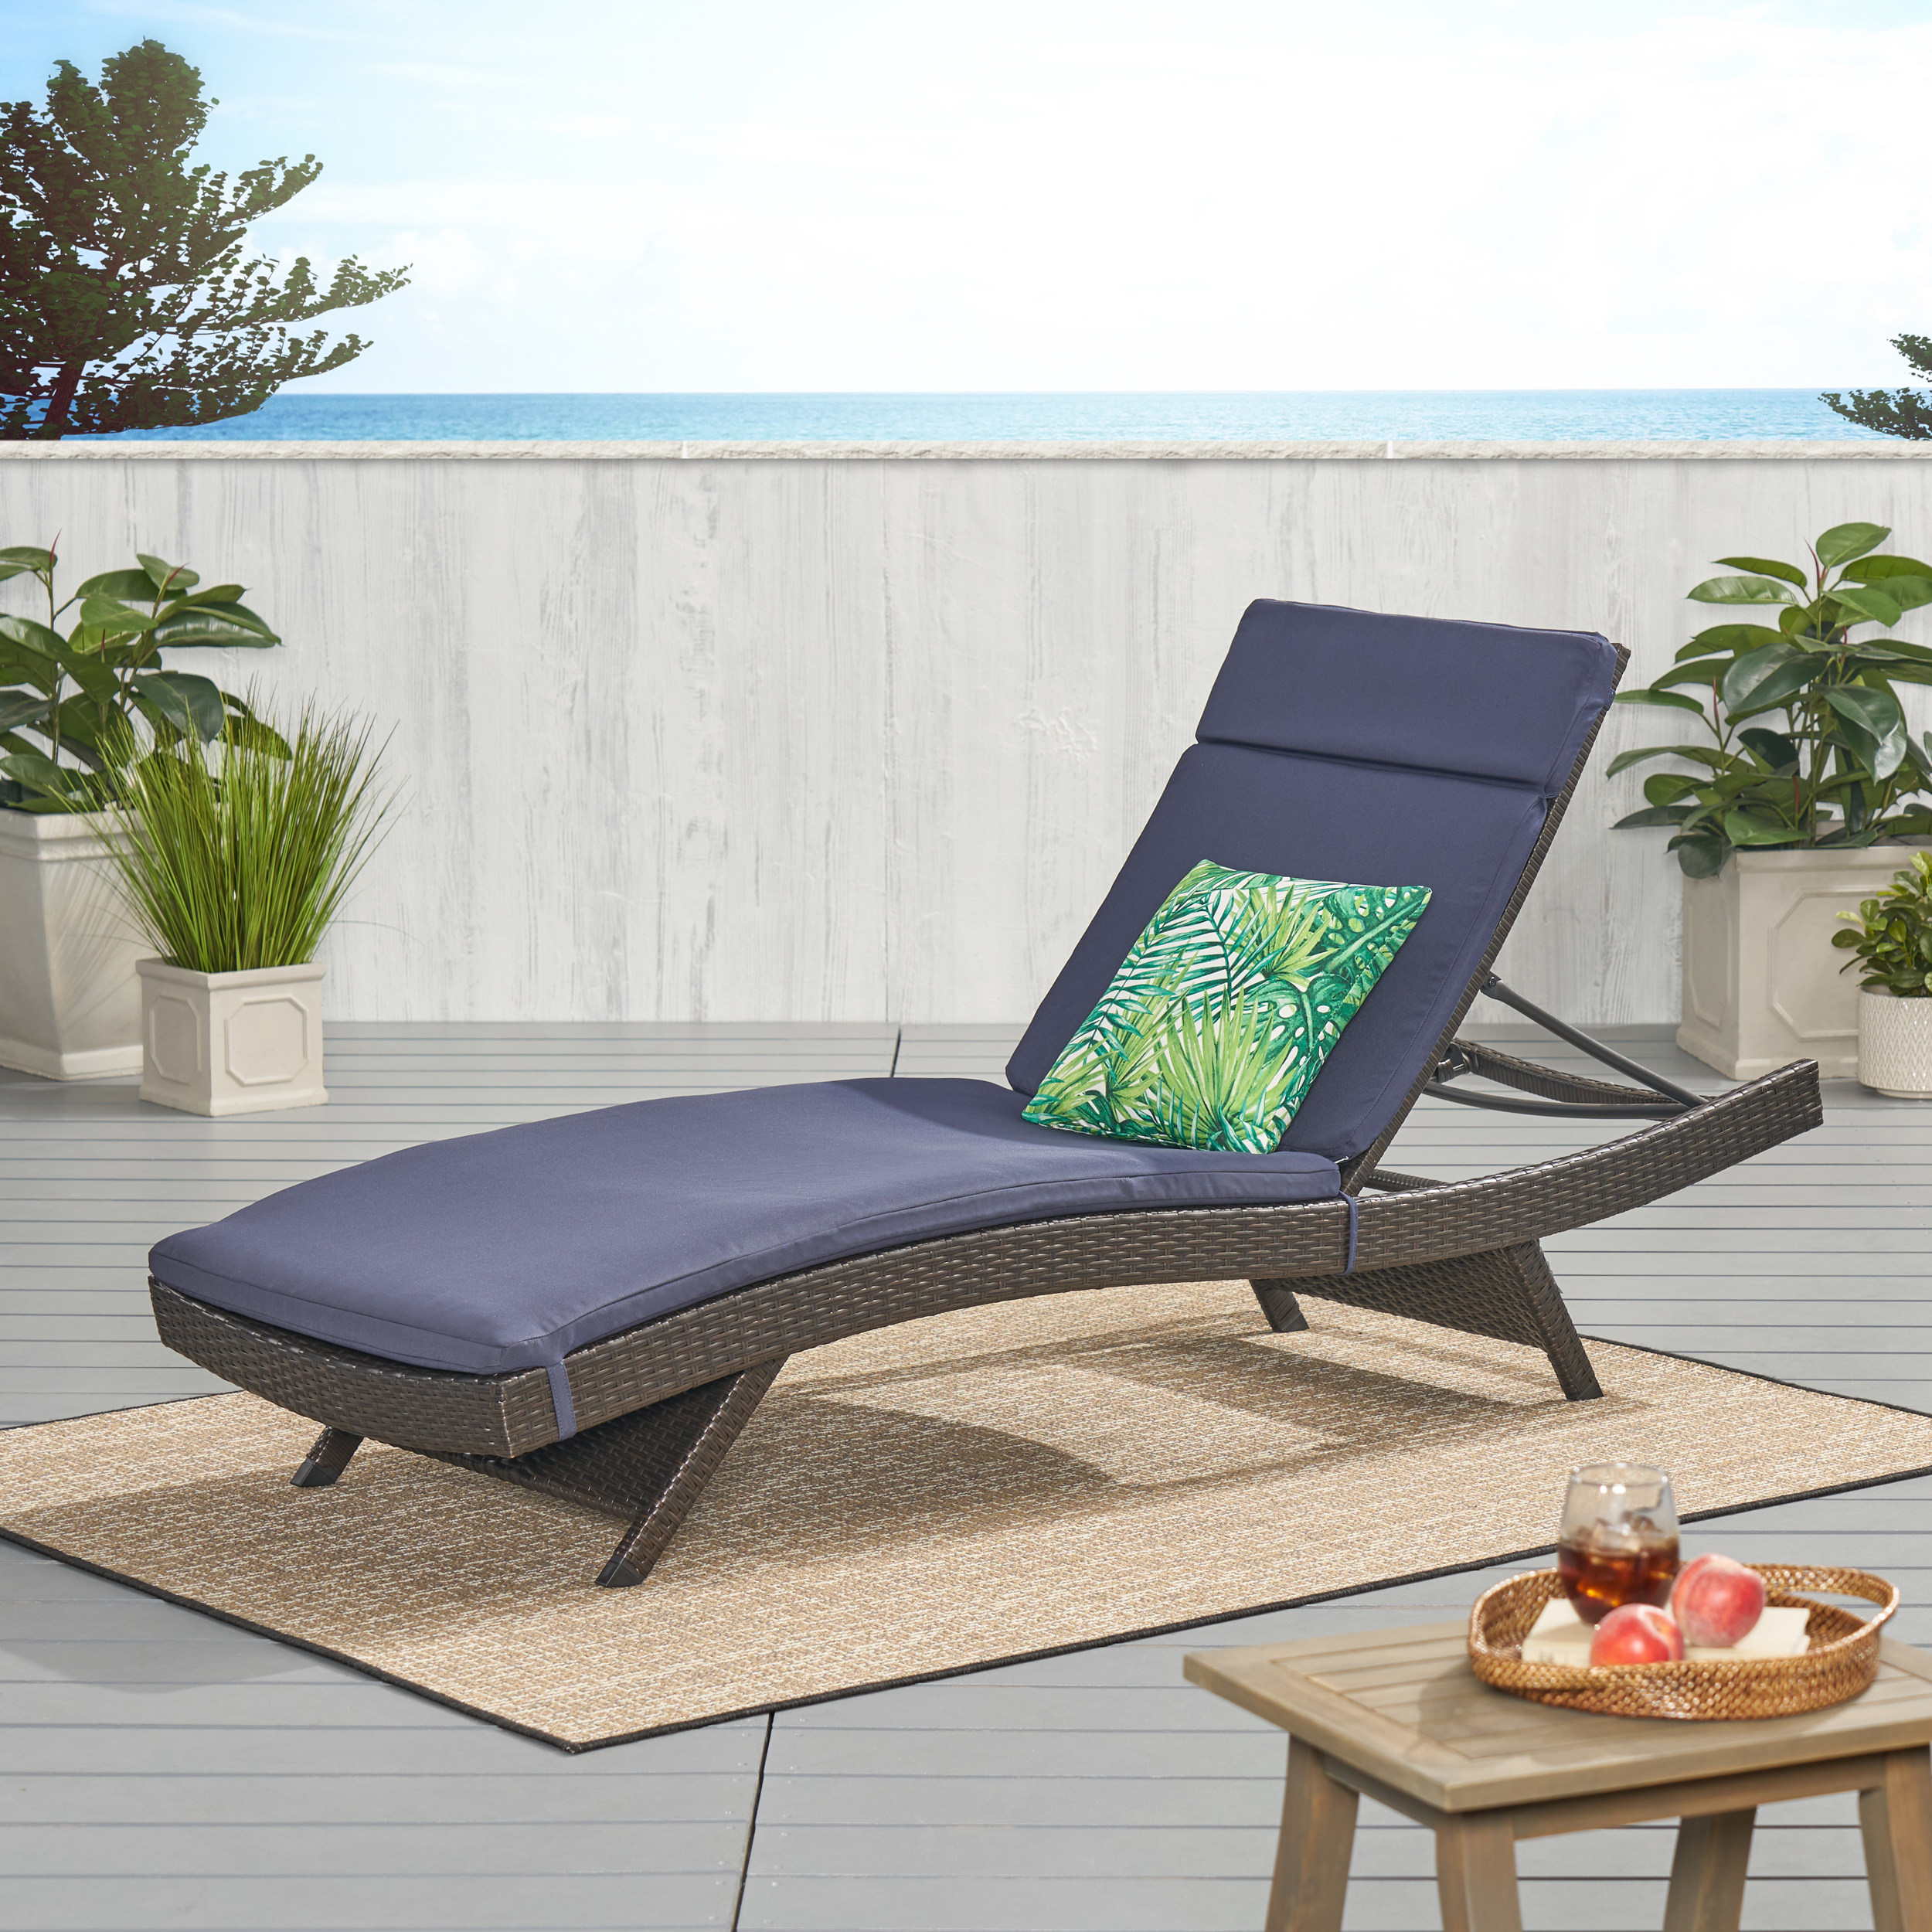 Lakeport Outdoor Adjustable Chaise Lounge Chair With Cushion - Red Cushion